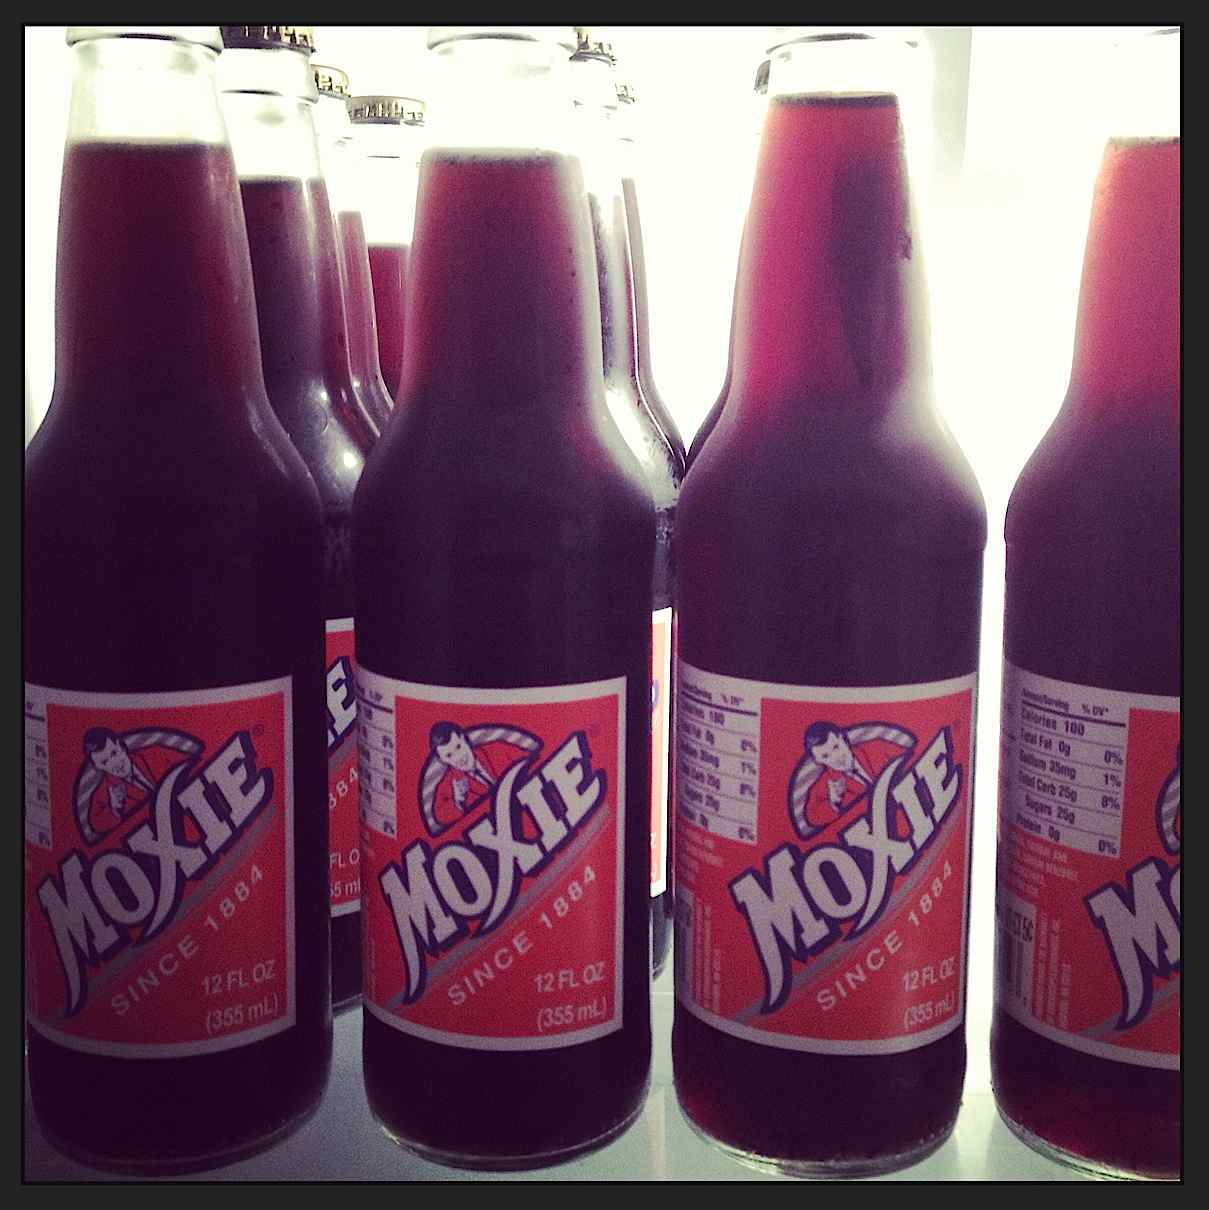 Order a 12 Pack of Moxie Soda